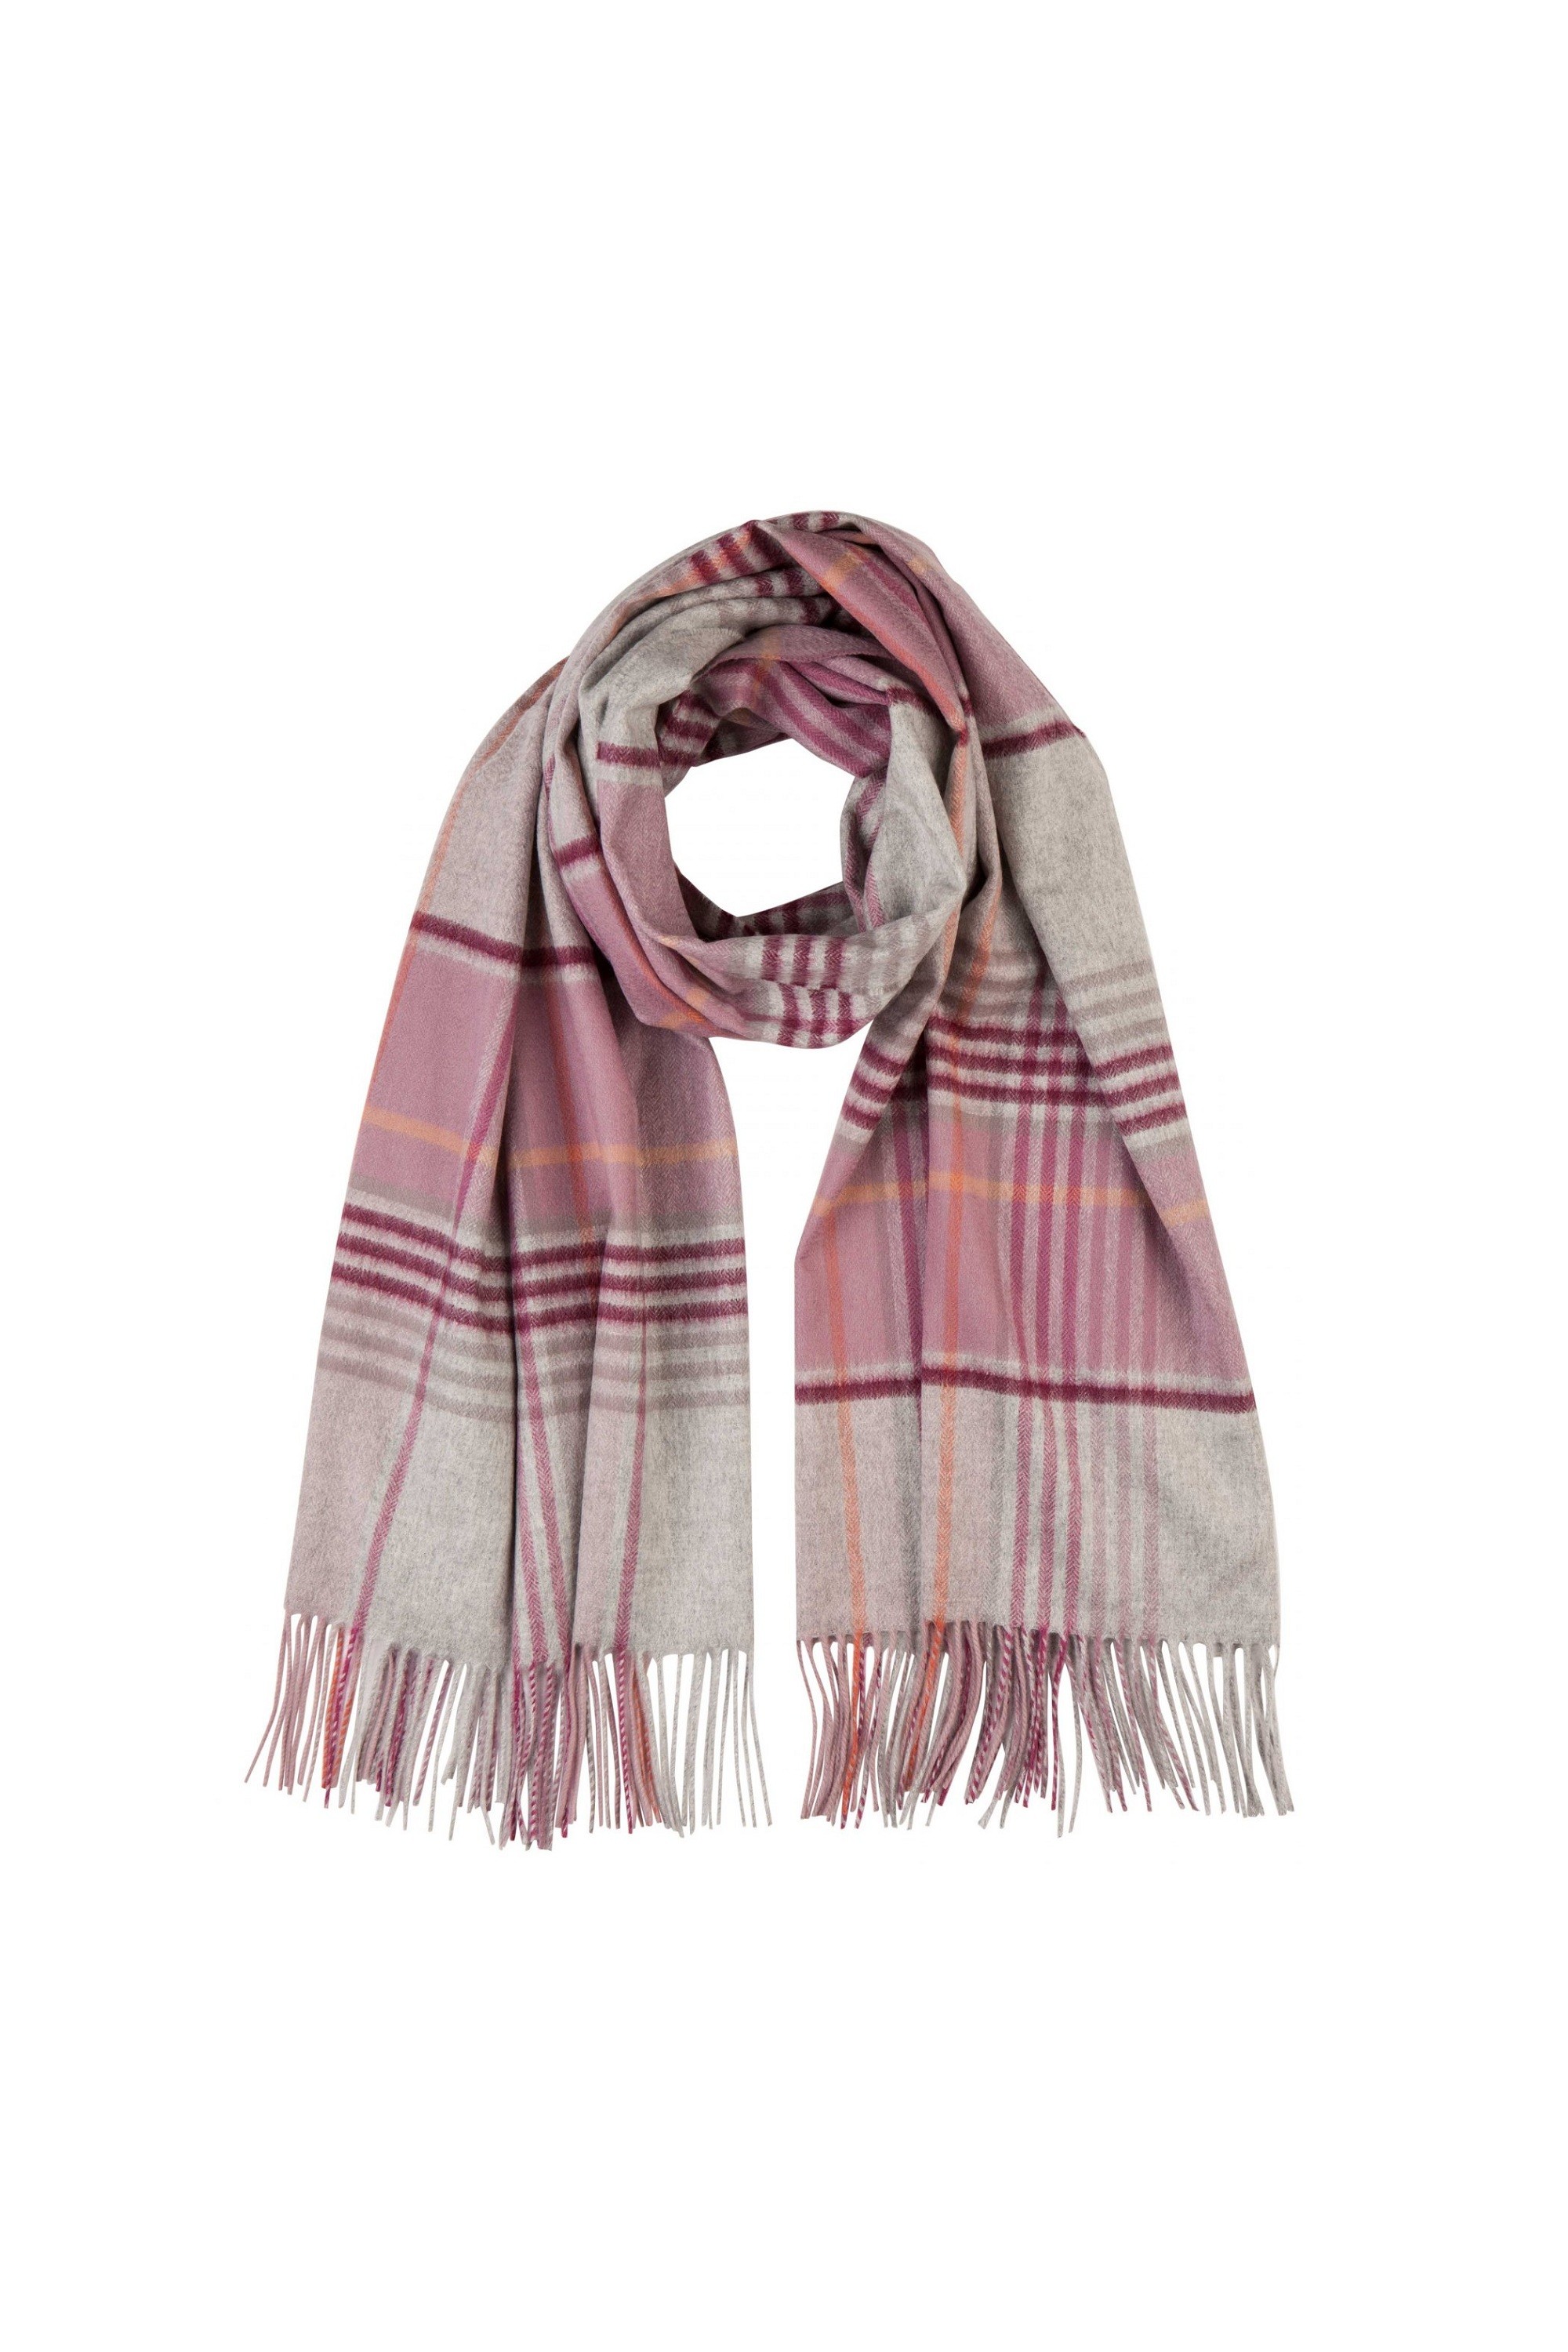 Cashmere Stole - Gingam Check Soft Berry